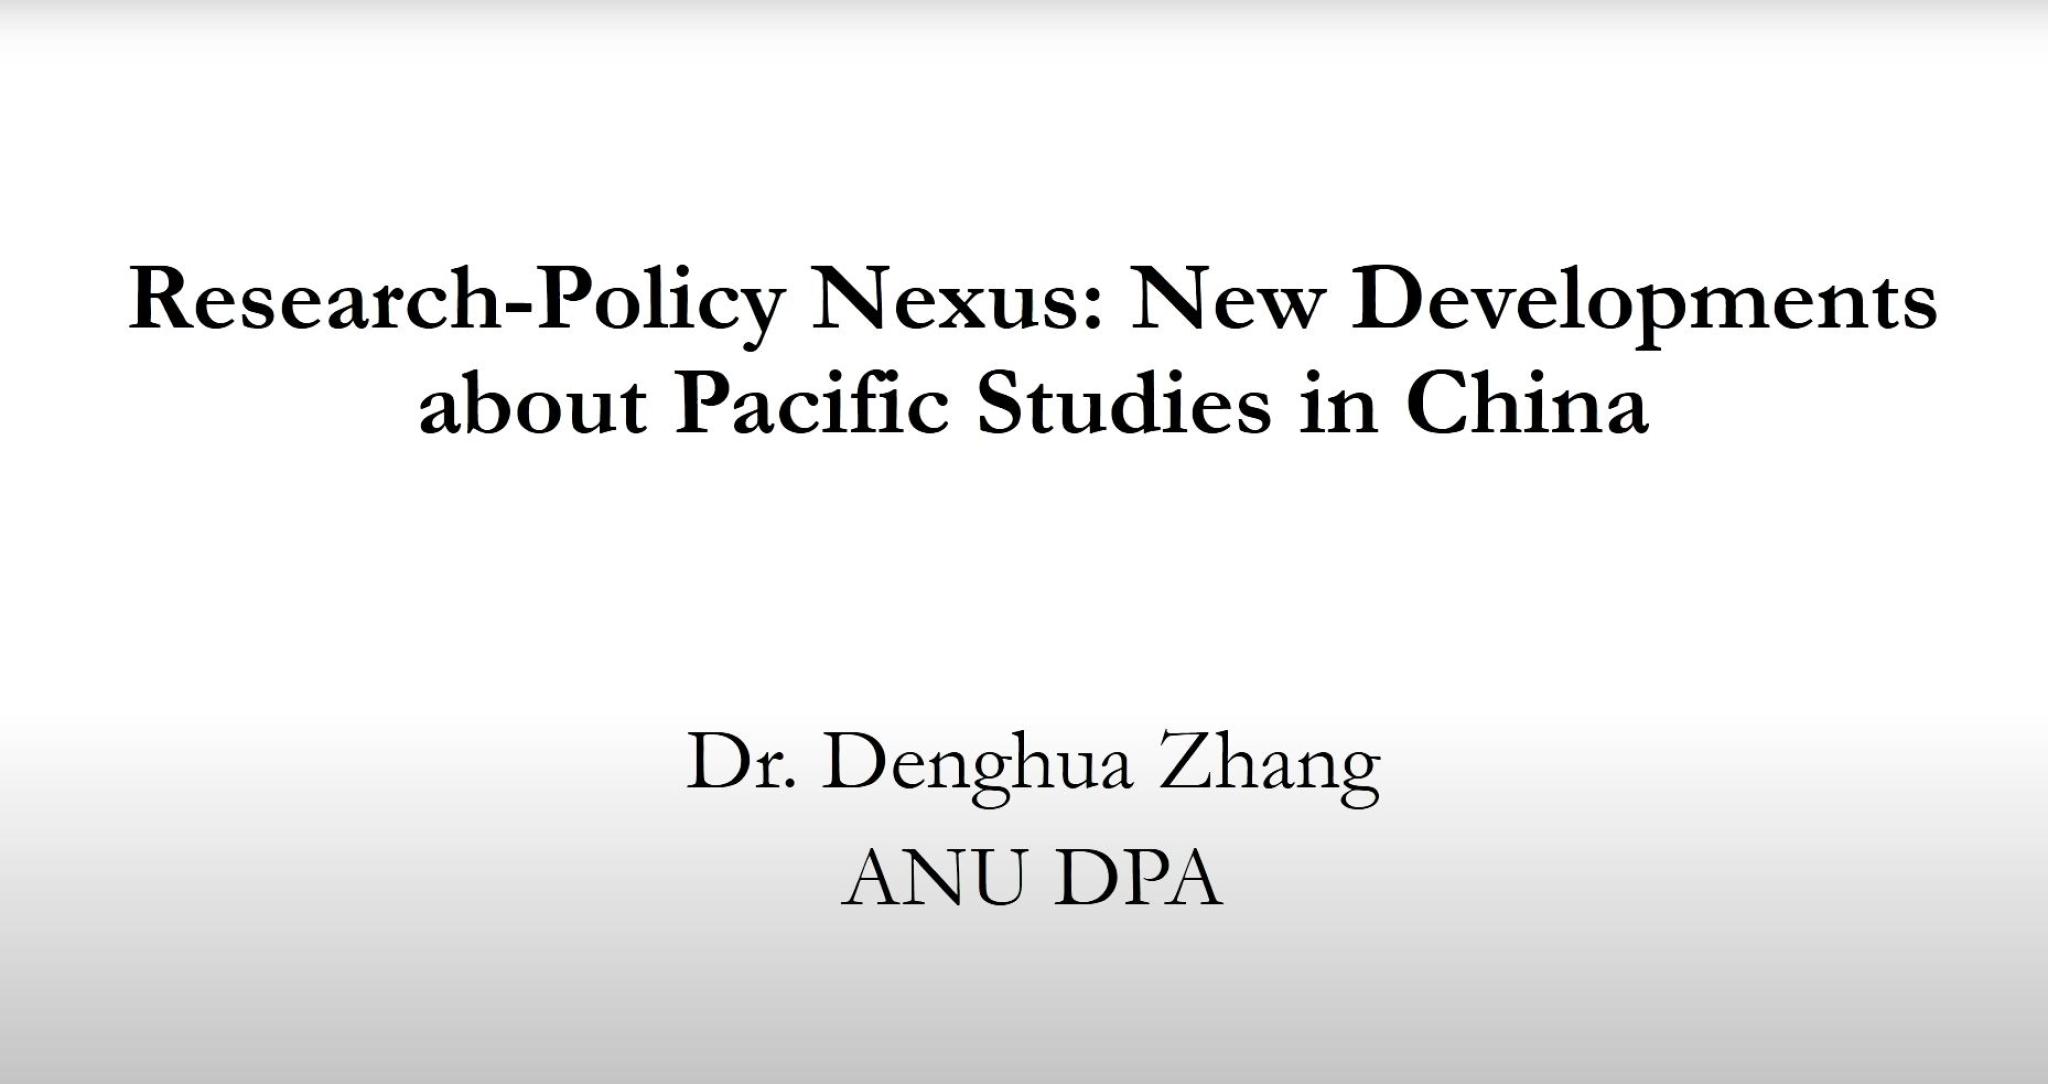 Research-Policy Nexus: New Developments about Pacific Studies in China